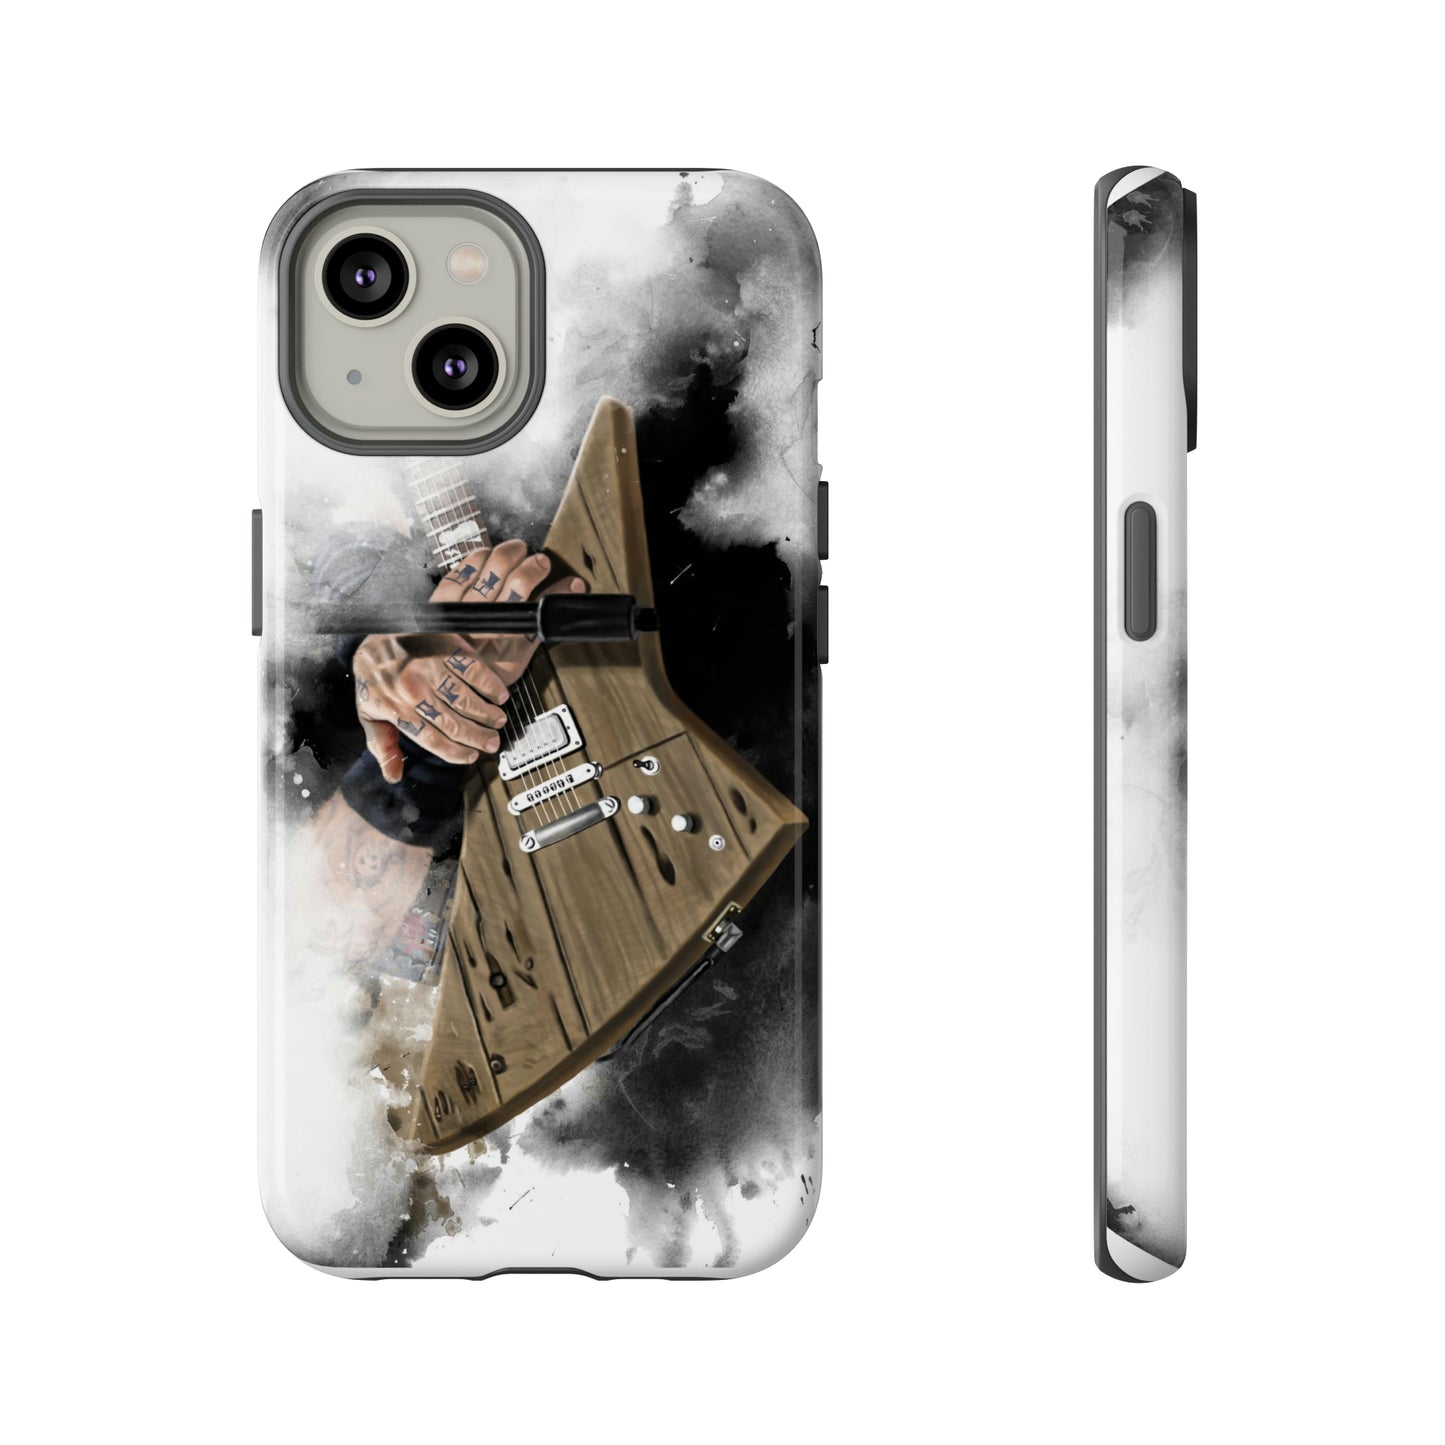 Digital painting of a brown electric guitar with hands printed on an iphone phone case